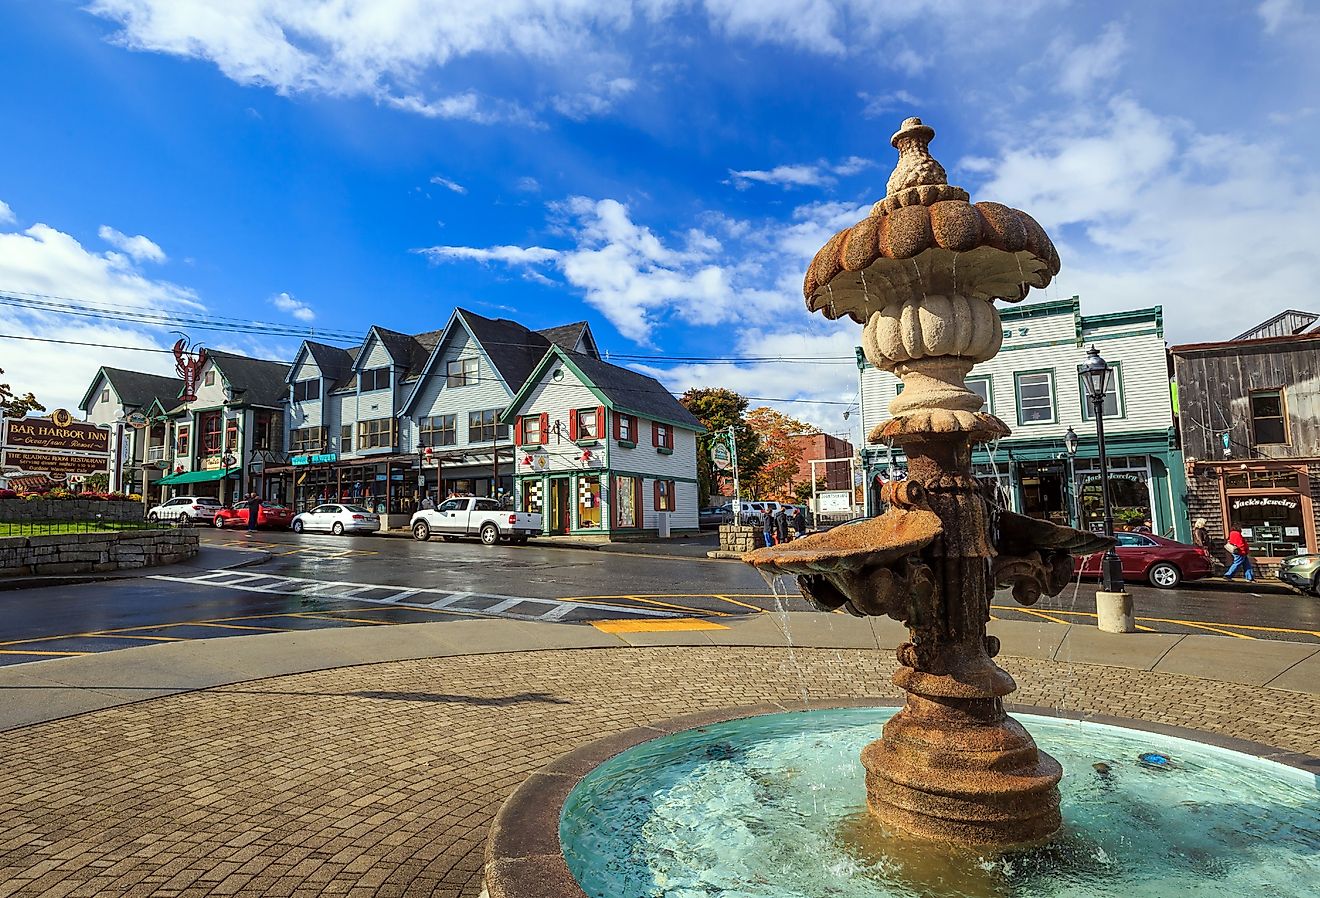 Bar Harbor architecture in downtown near Frenchman Bay in Maine. Image credit f11photo via Shutterstock